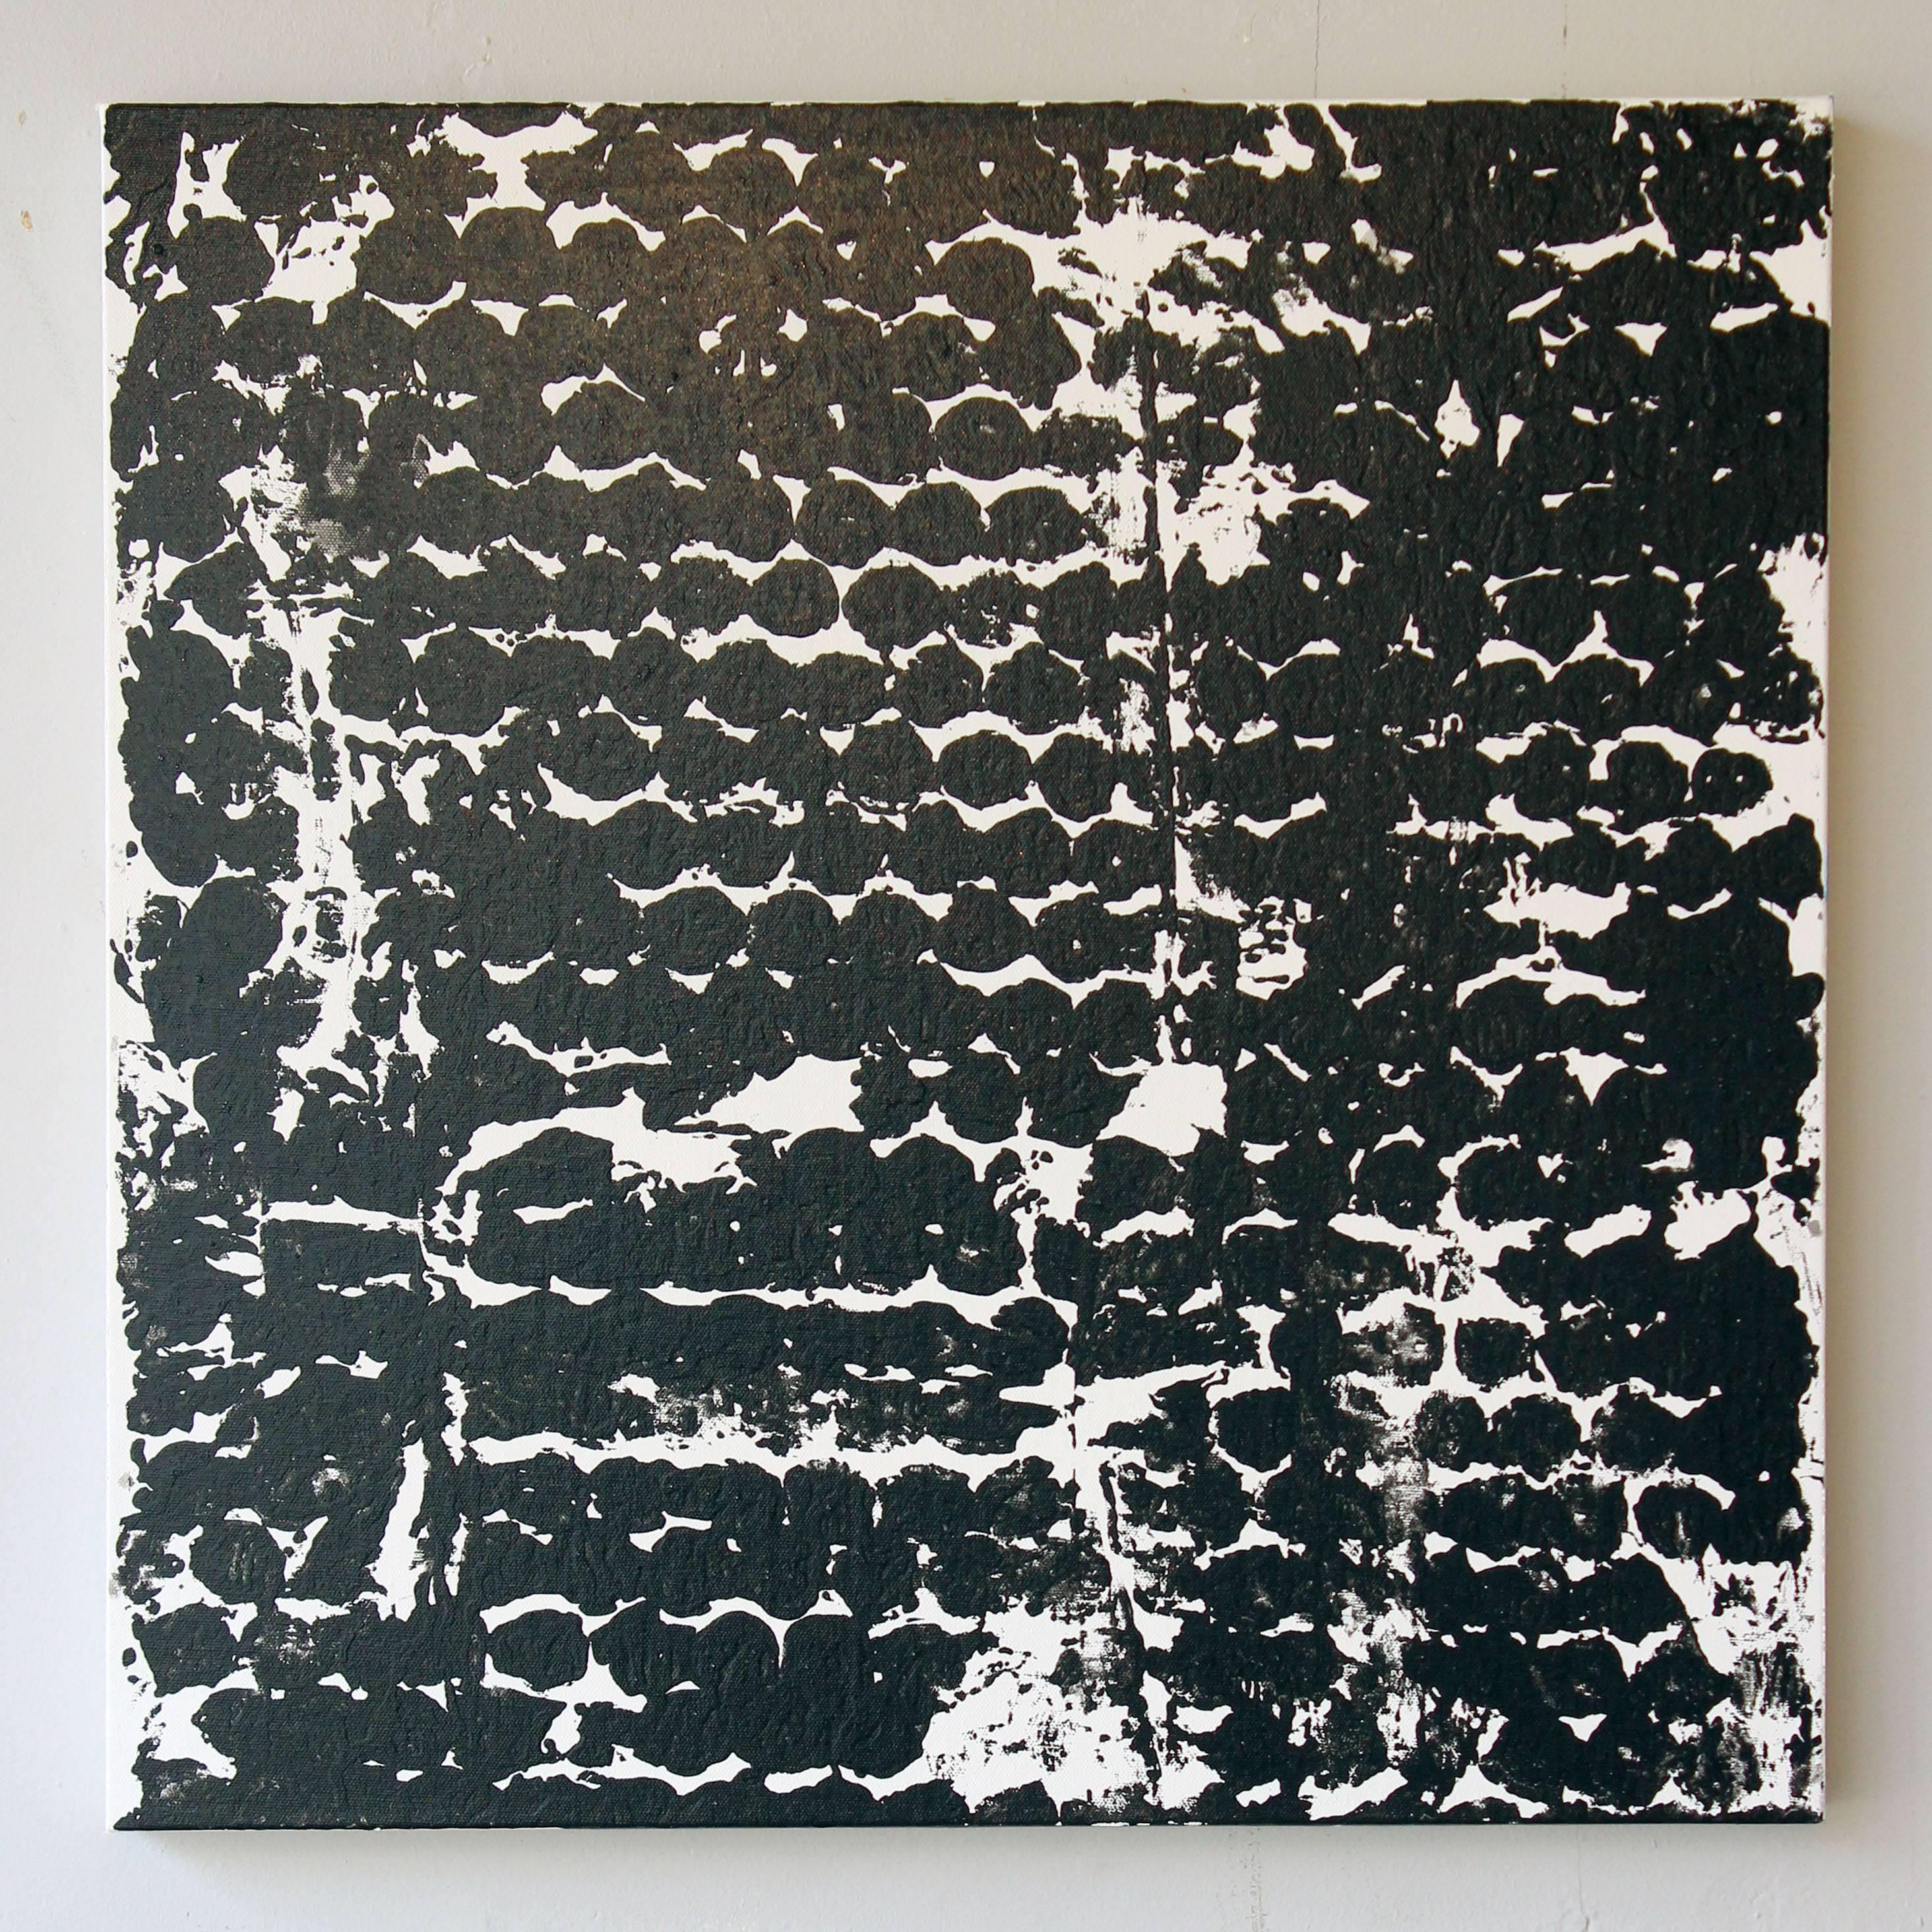 Square #2 black and white painting on canvas by Sheila White, 2016.